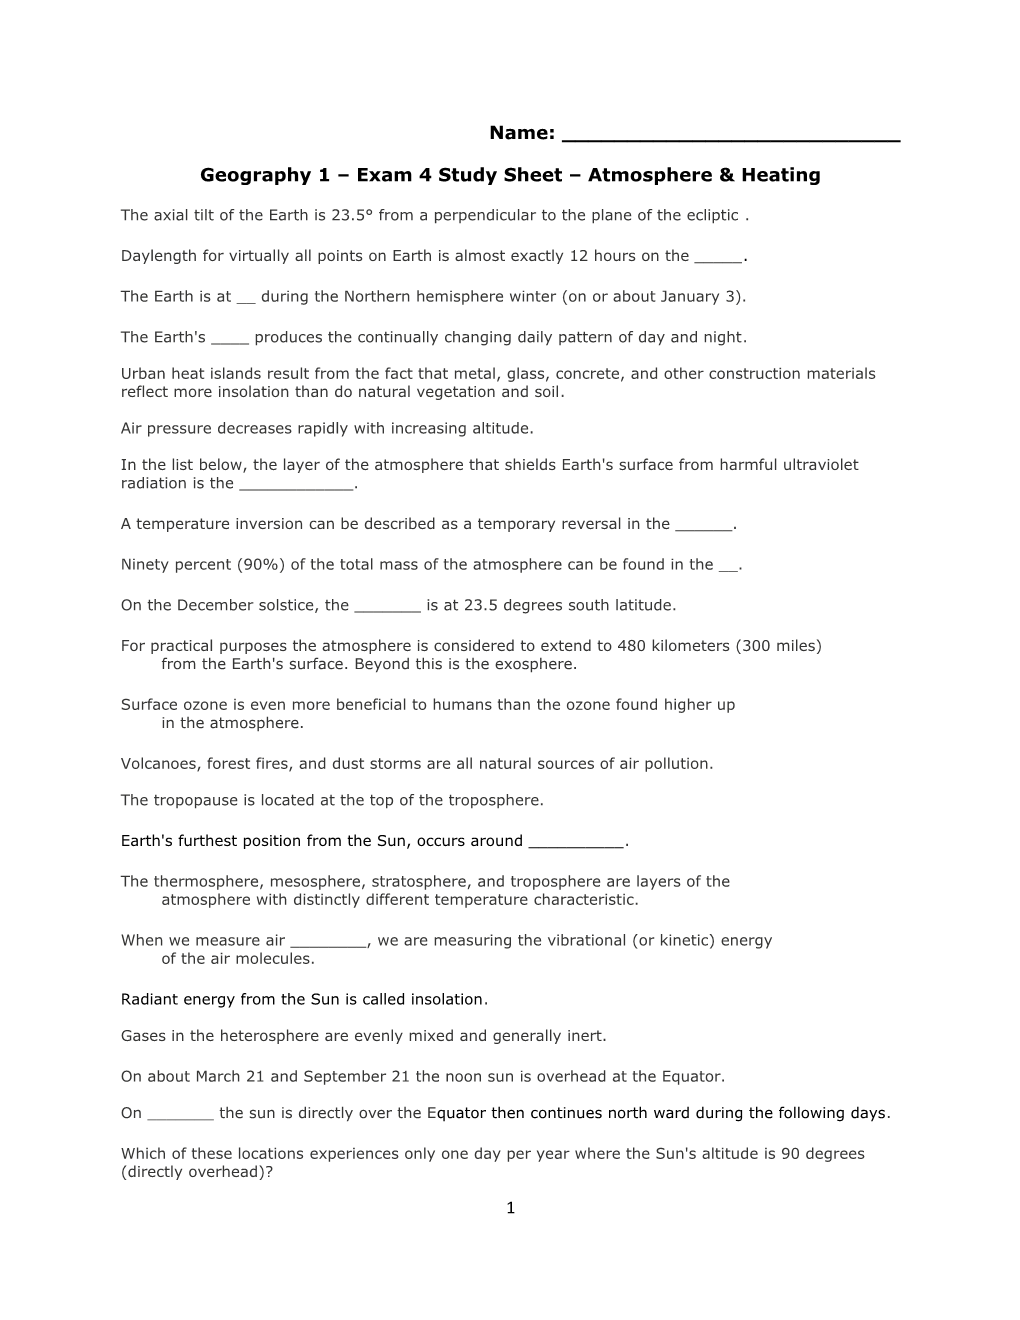 Geography 1 Exam 4 Study Sheet Atmosphere Heating